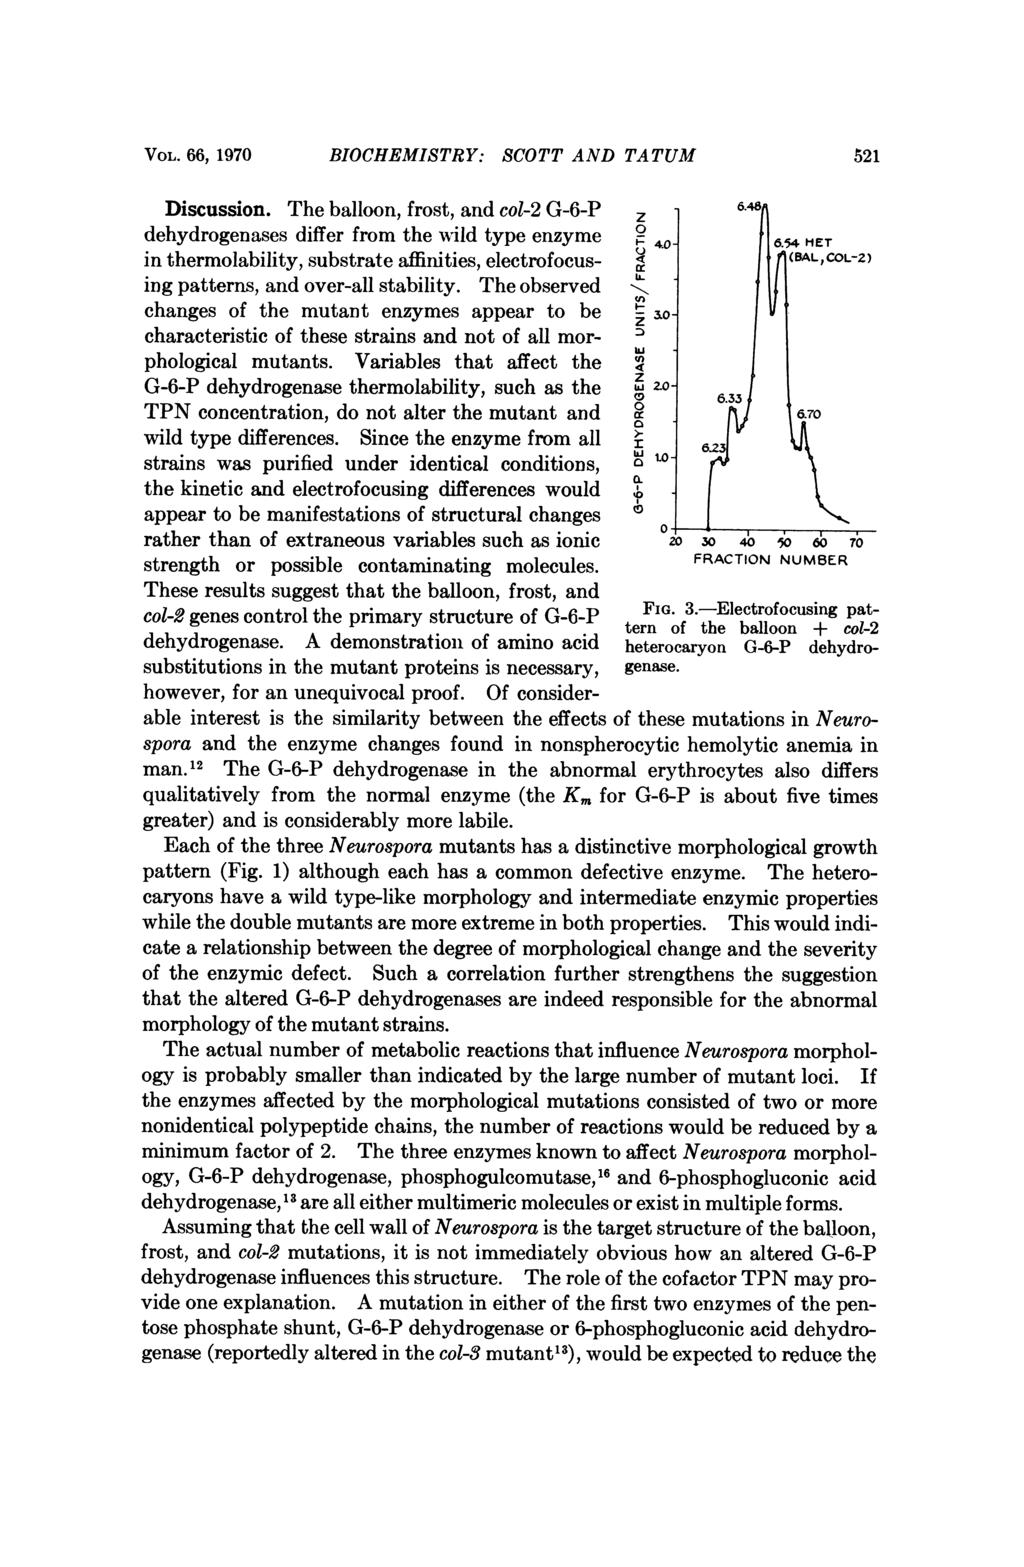 VOL. 66, 1970 BIOCHEMISTRY: SCOTT AND TATUM 521 Discussion. The balloon, frost, and col-2 G-6-P 6.48 dehydrogenases differ from the wild type enzyme 40 6.